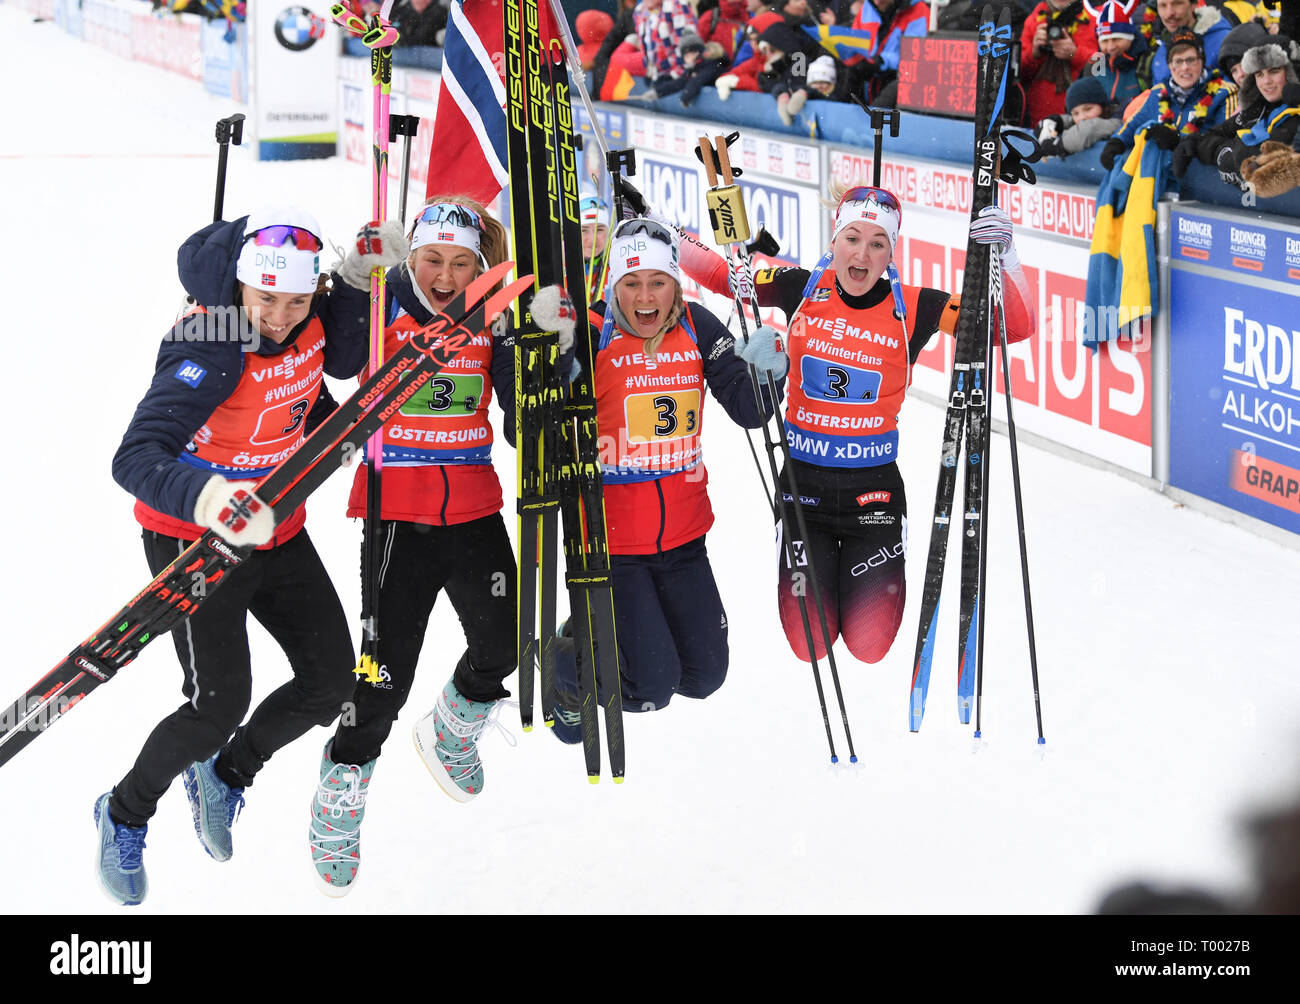 16 March 2019, Sweden, Östersund: Biathlon: World Championship, Relay 4 x 6  km, Women. The Norwegian biathletes are cheering after winning the relay.  L-R: Synnoeve Solemdal from Norway, Ingrid Landmark Tandrevold from